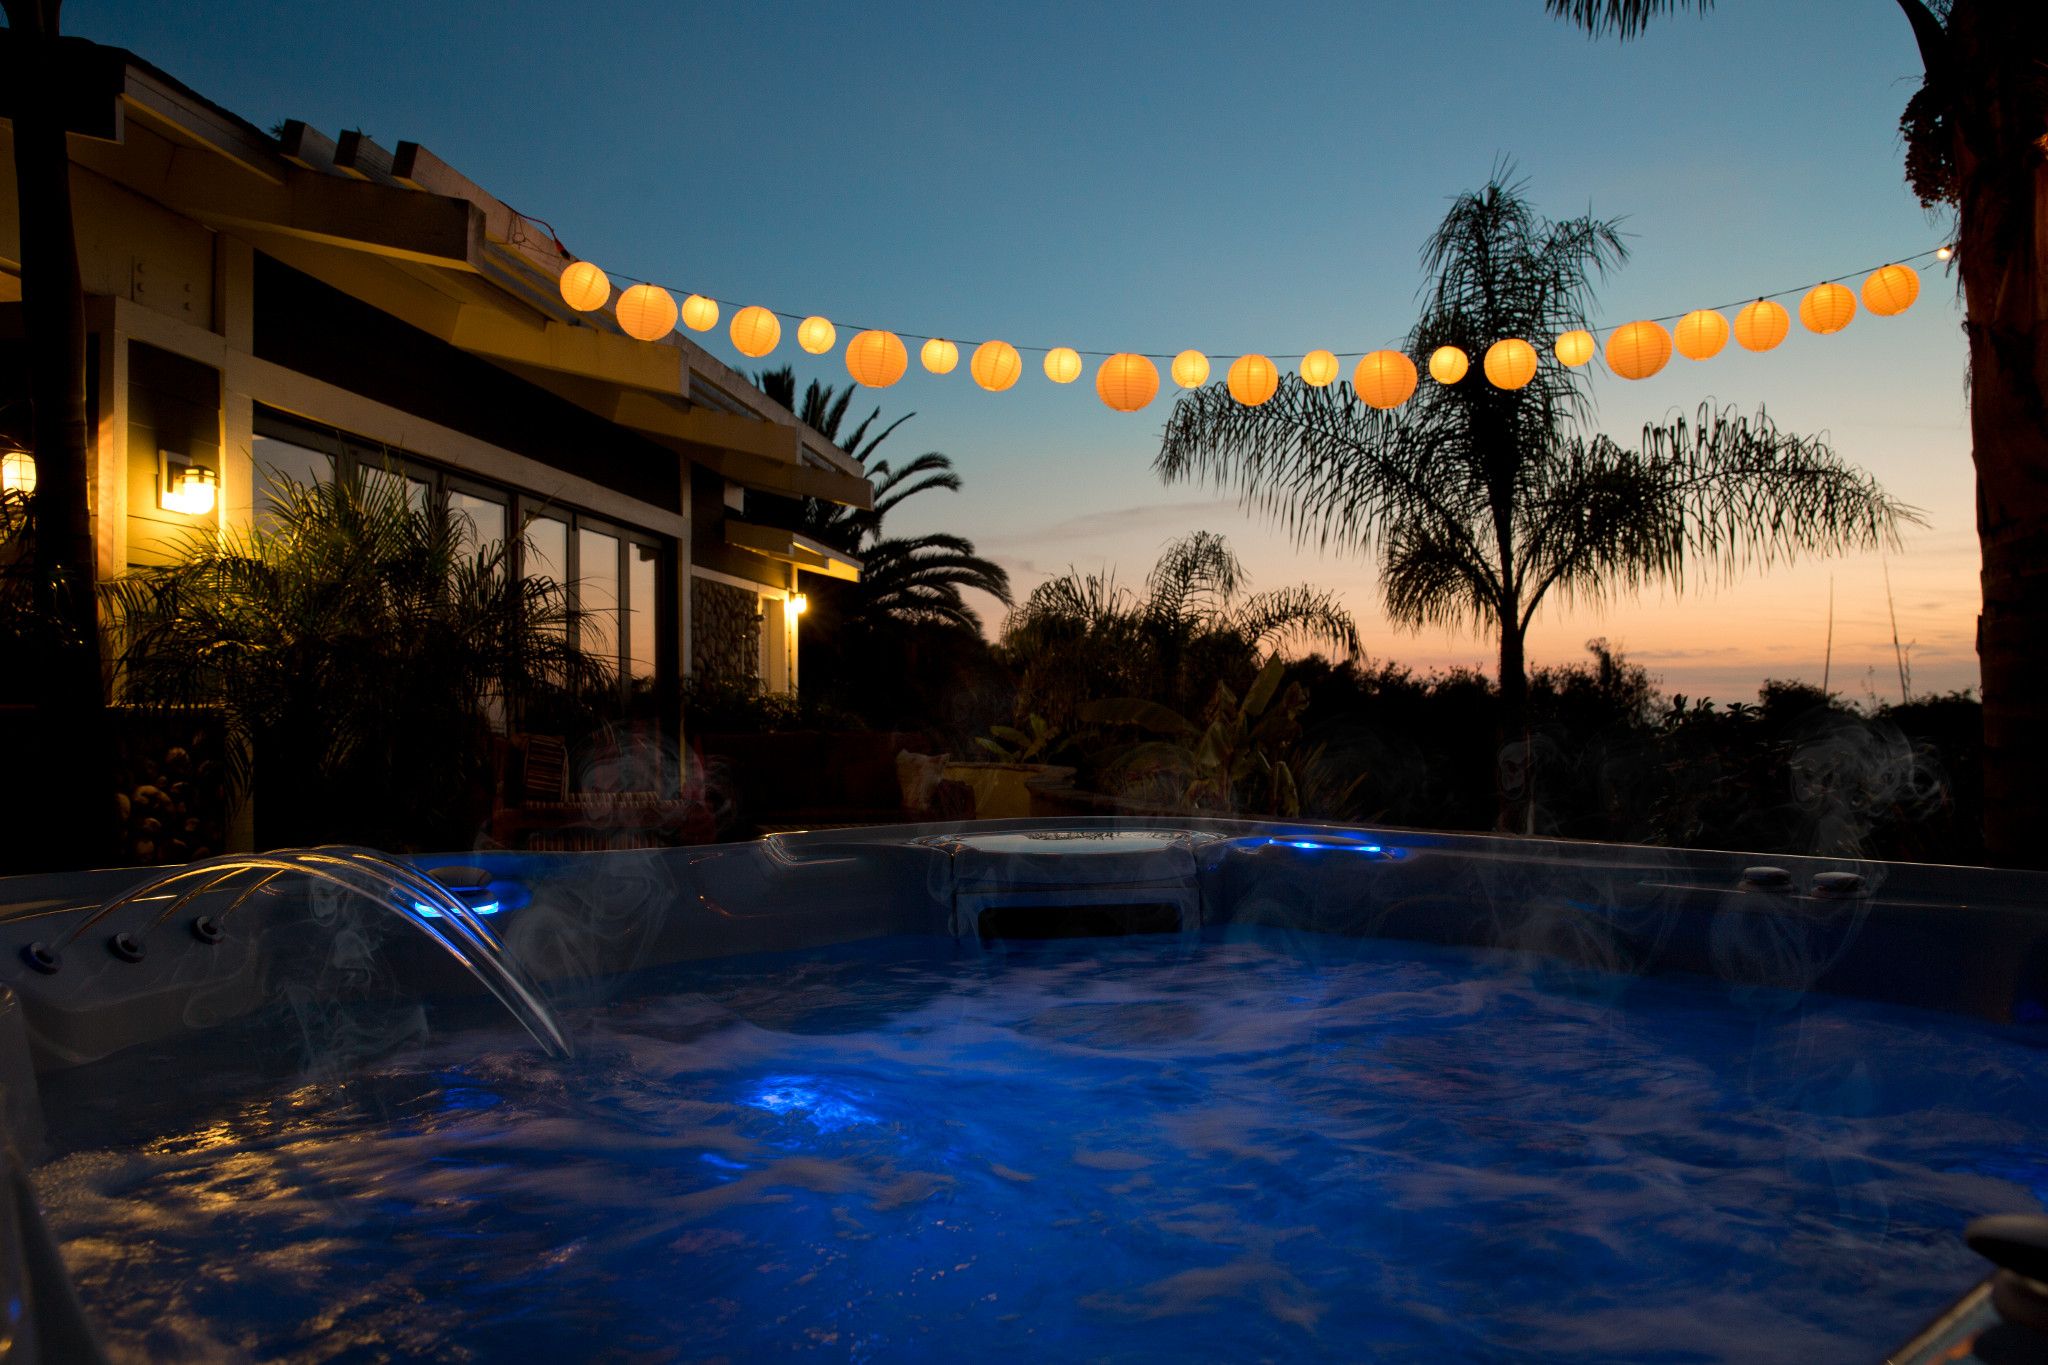 Hosting a Halloween Hot Tub Party Makes Fall’s Colors Brighter